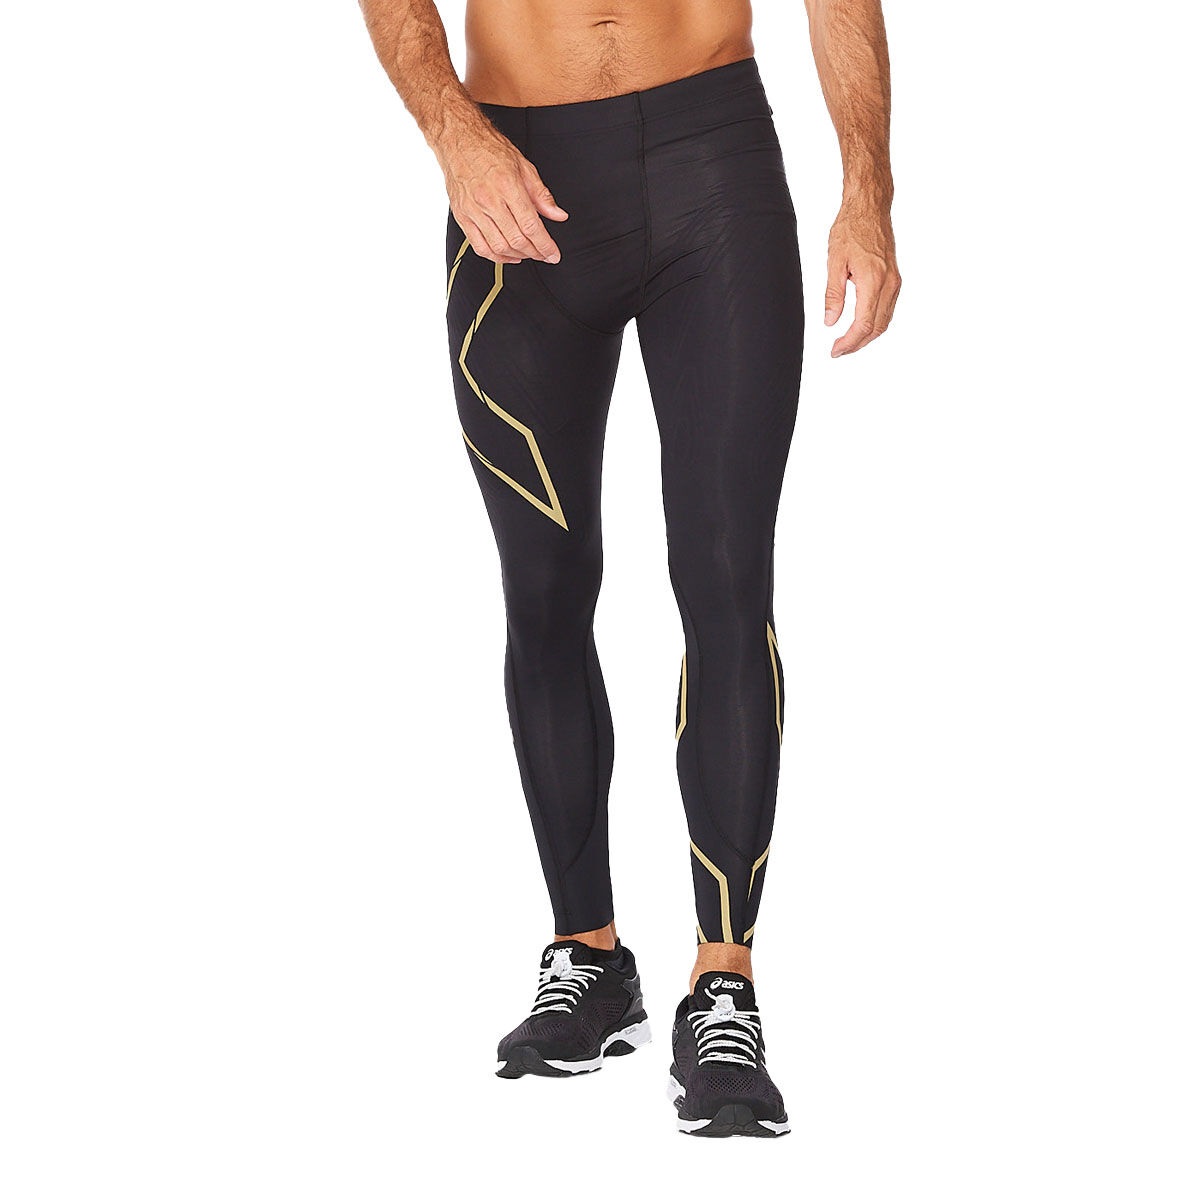 Just Care Men Compression Lower Workout Standard Spats Base Layer Compression  Pants Tights Black Small  Amazonin Clothing  Accessories